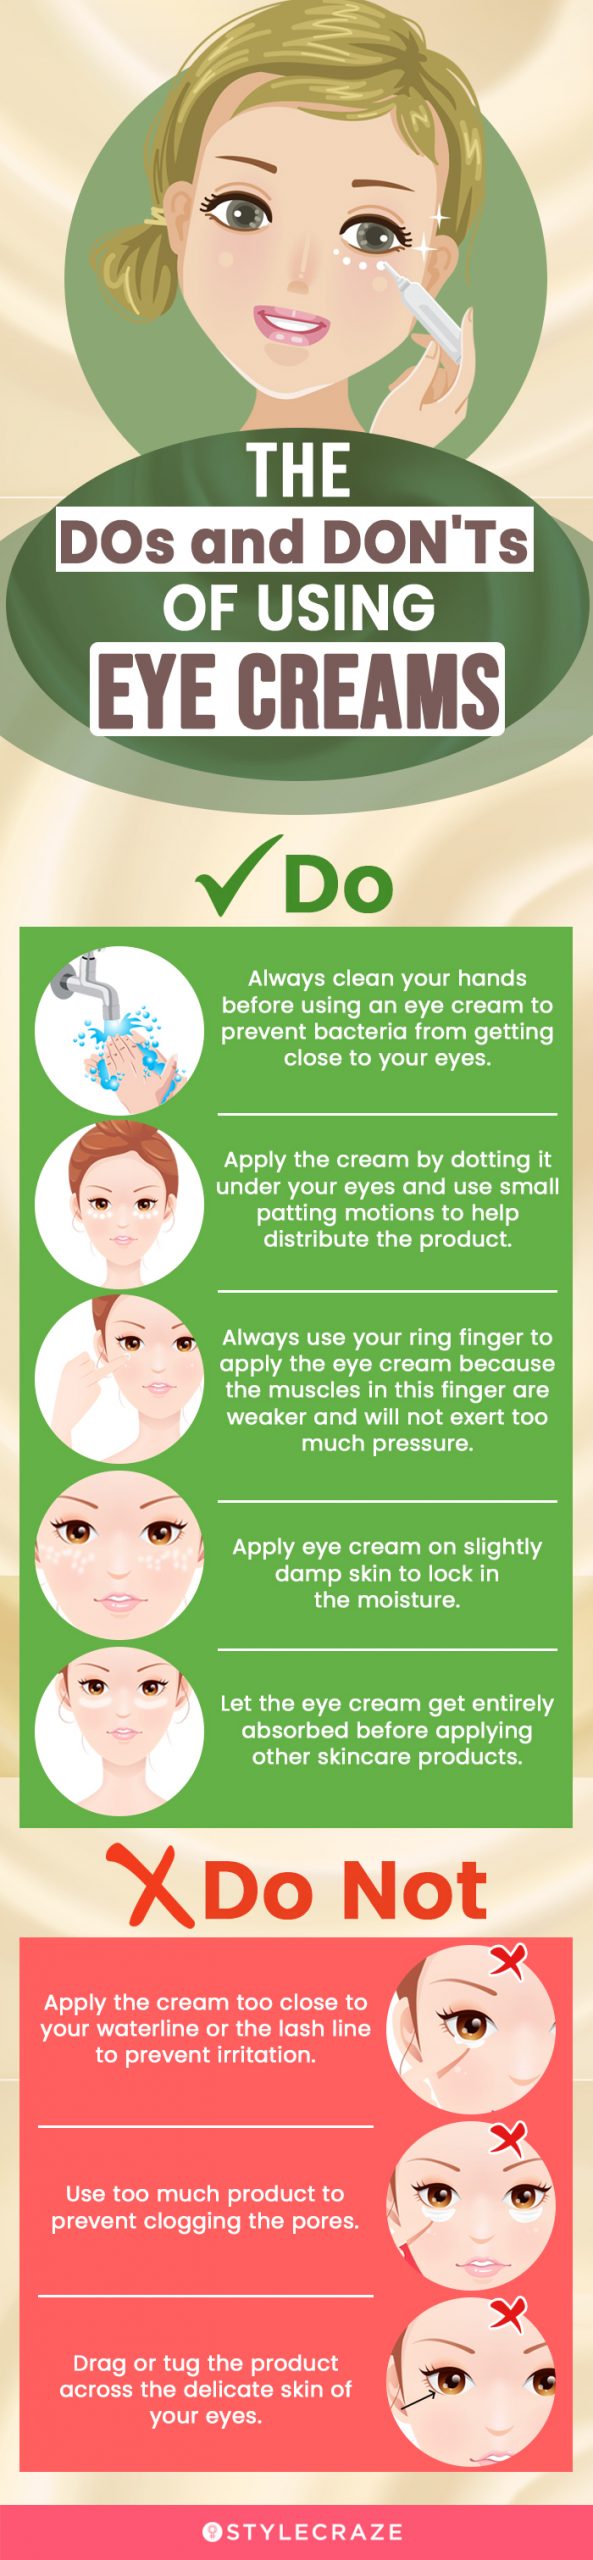 The DO’s and DON'Ts Of Using An Eye Cream (infographic)